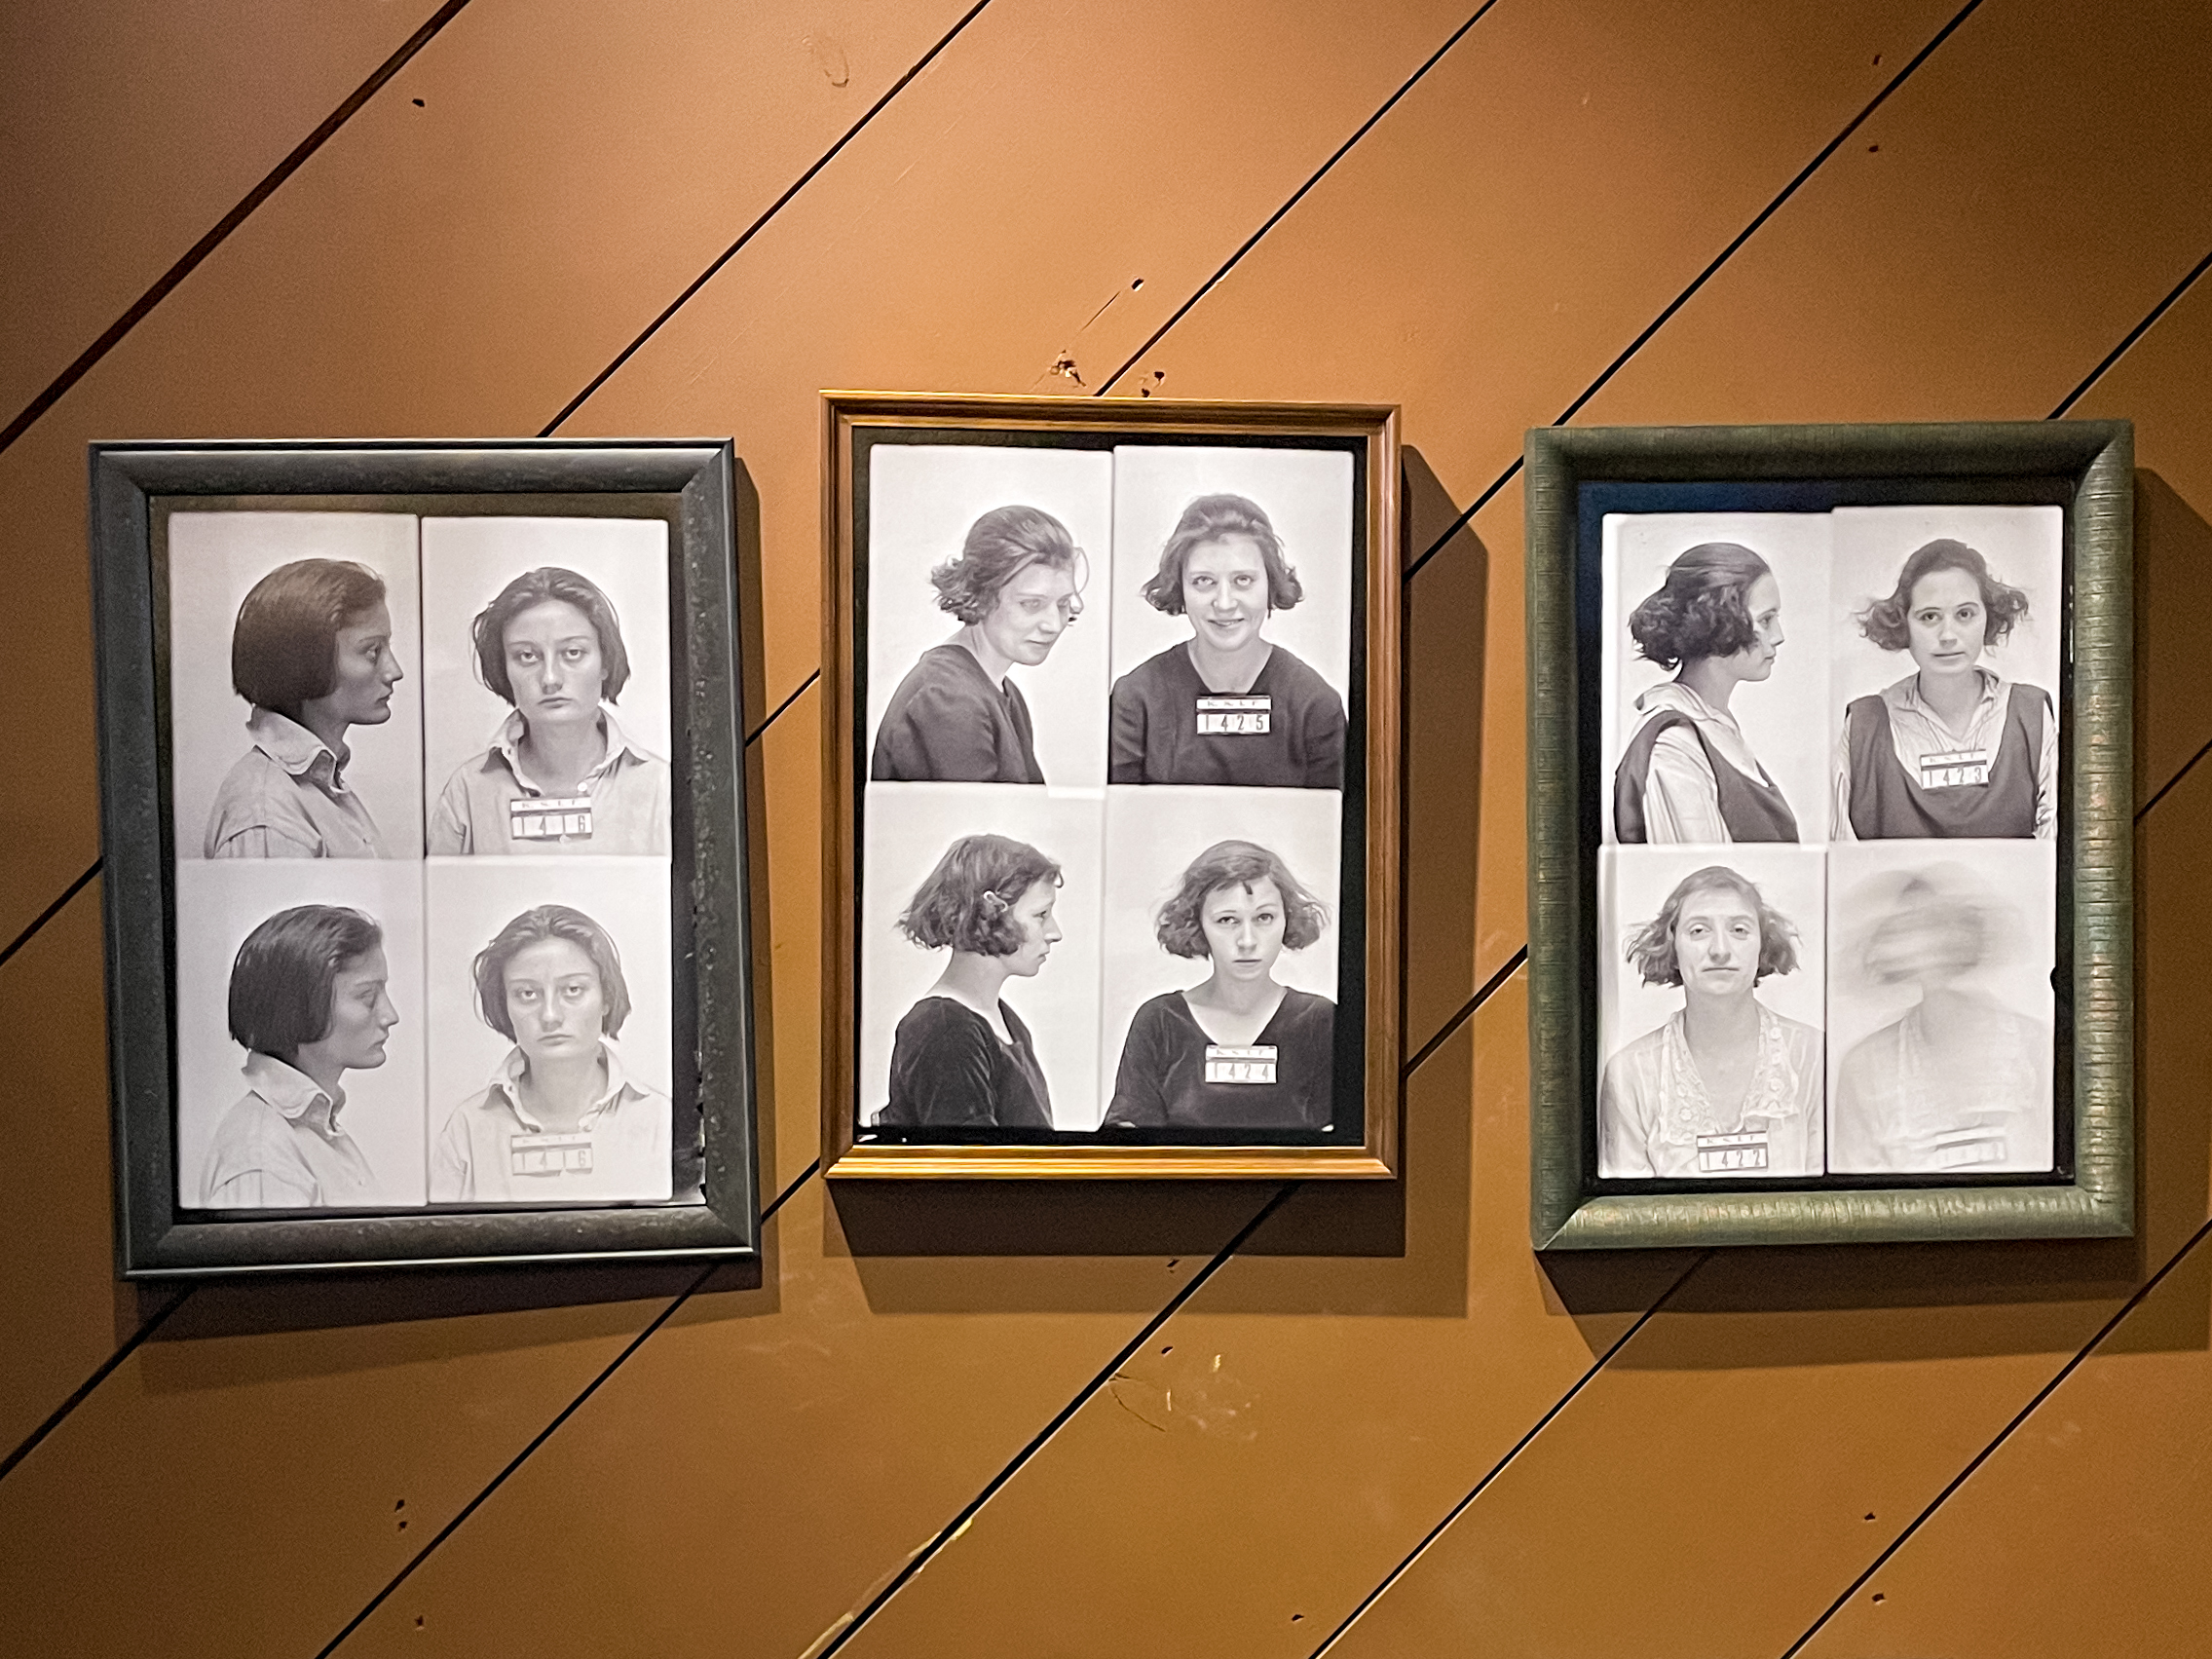 Three frames hang on a wall. Within each frame is a prison intake photo of a woman who served a sentence at the Kansas State Industrial Farm for Women. The first frame is black and contains four images of one woman. The second frame is gold and contains four prison intake photos, two of two different women. The final frame is green and contains four prison intake photos, two of two different women. The bottom right photo in this frame is blurry as the woman must have moved when the photo was taken.